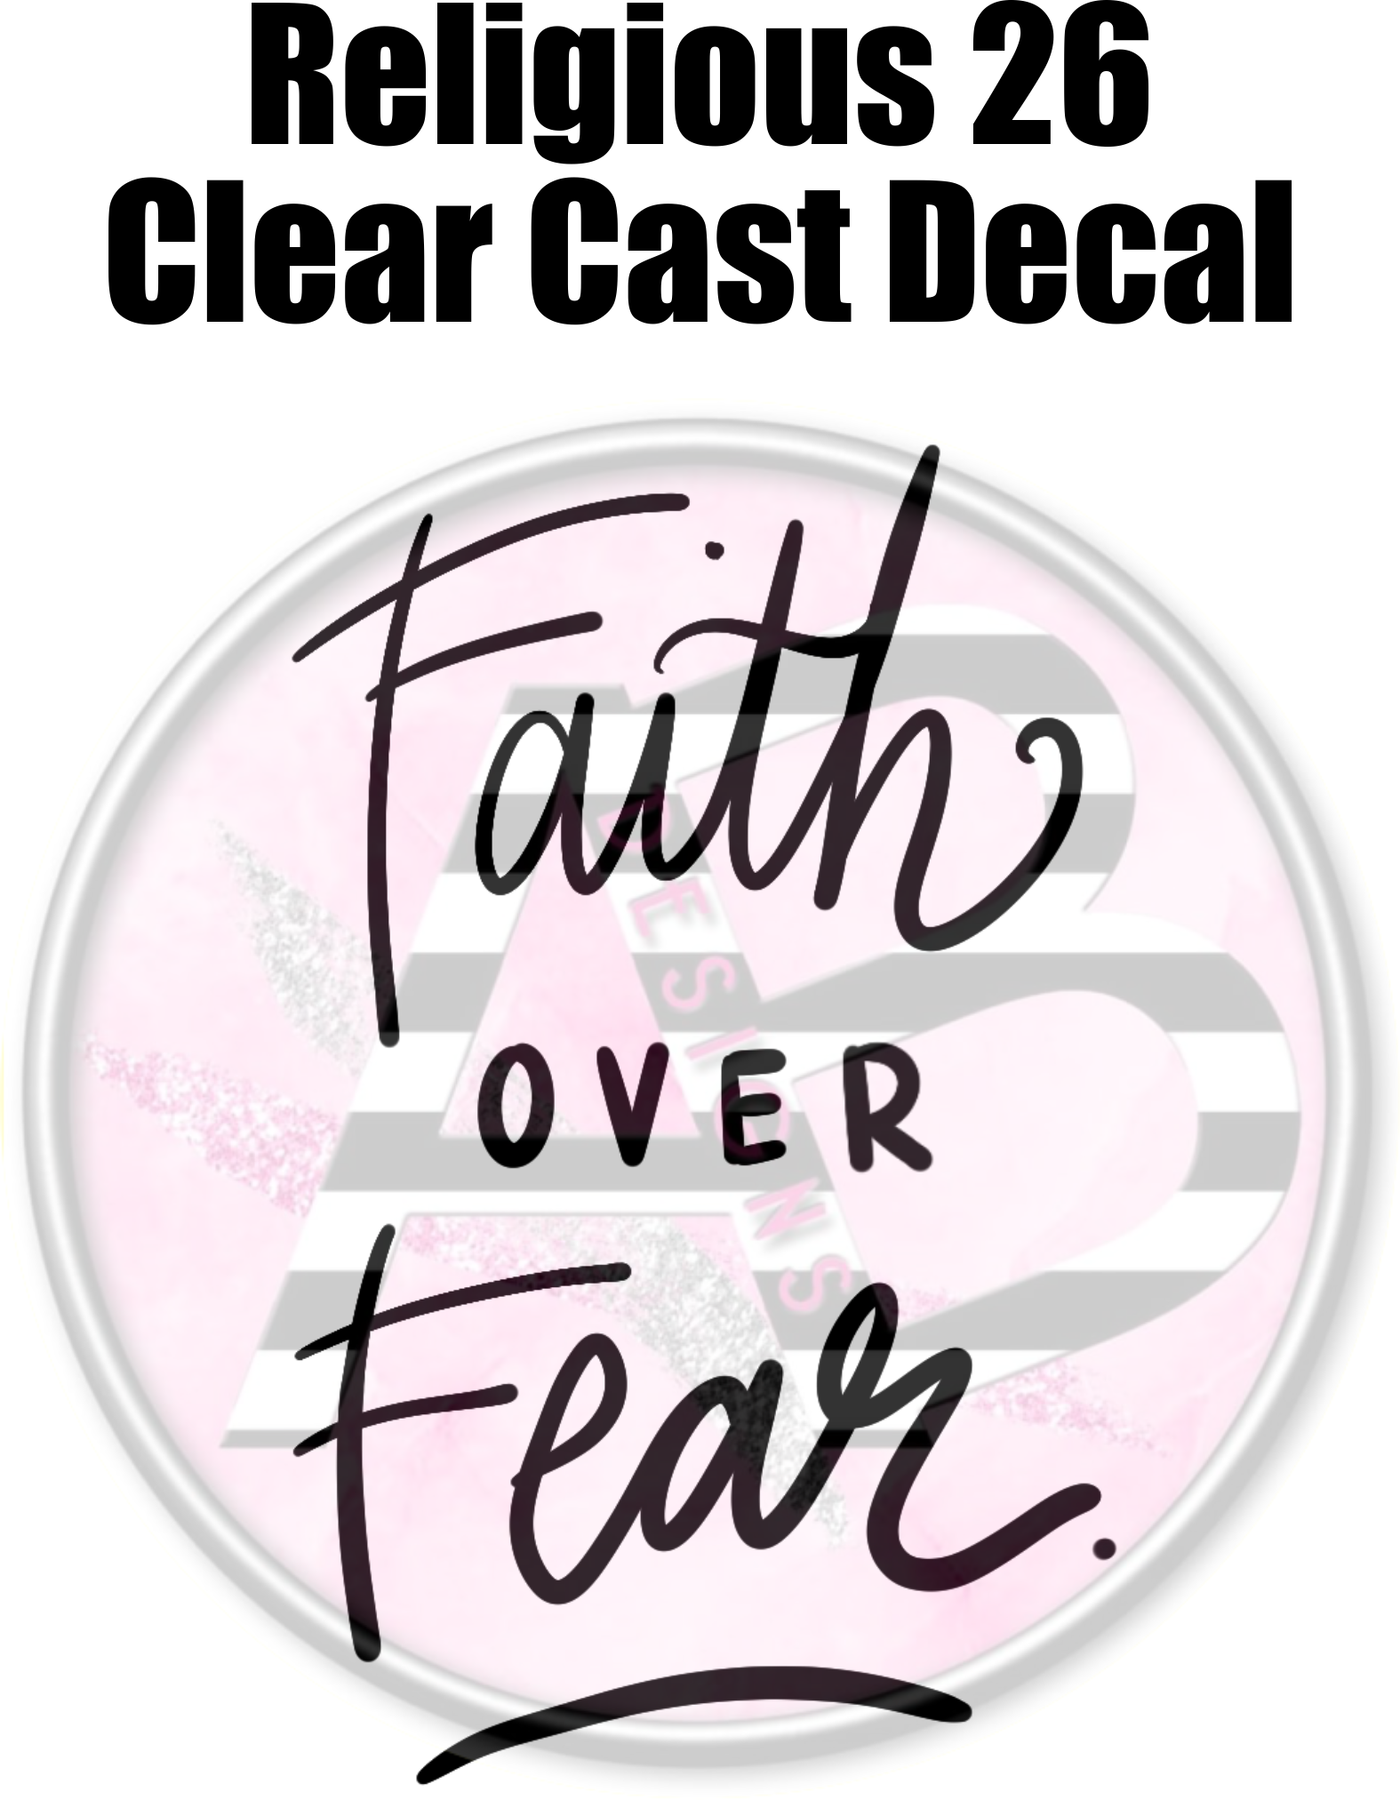 Religious 26 - Clear Cast Decal